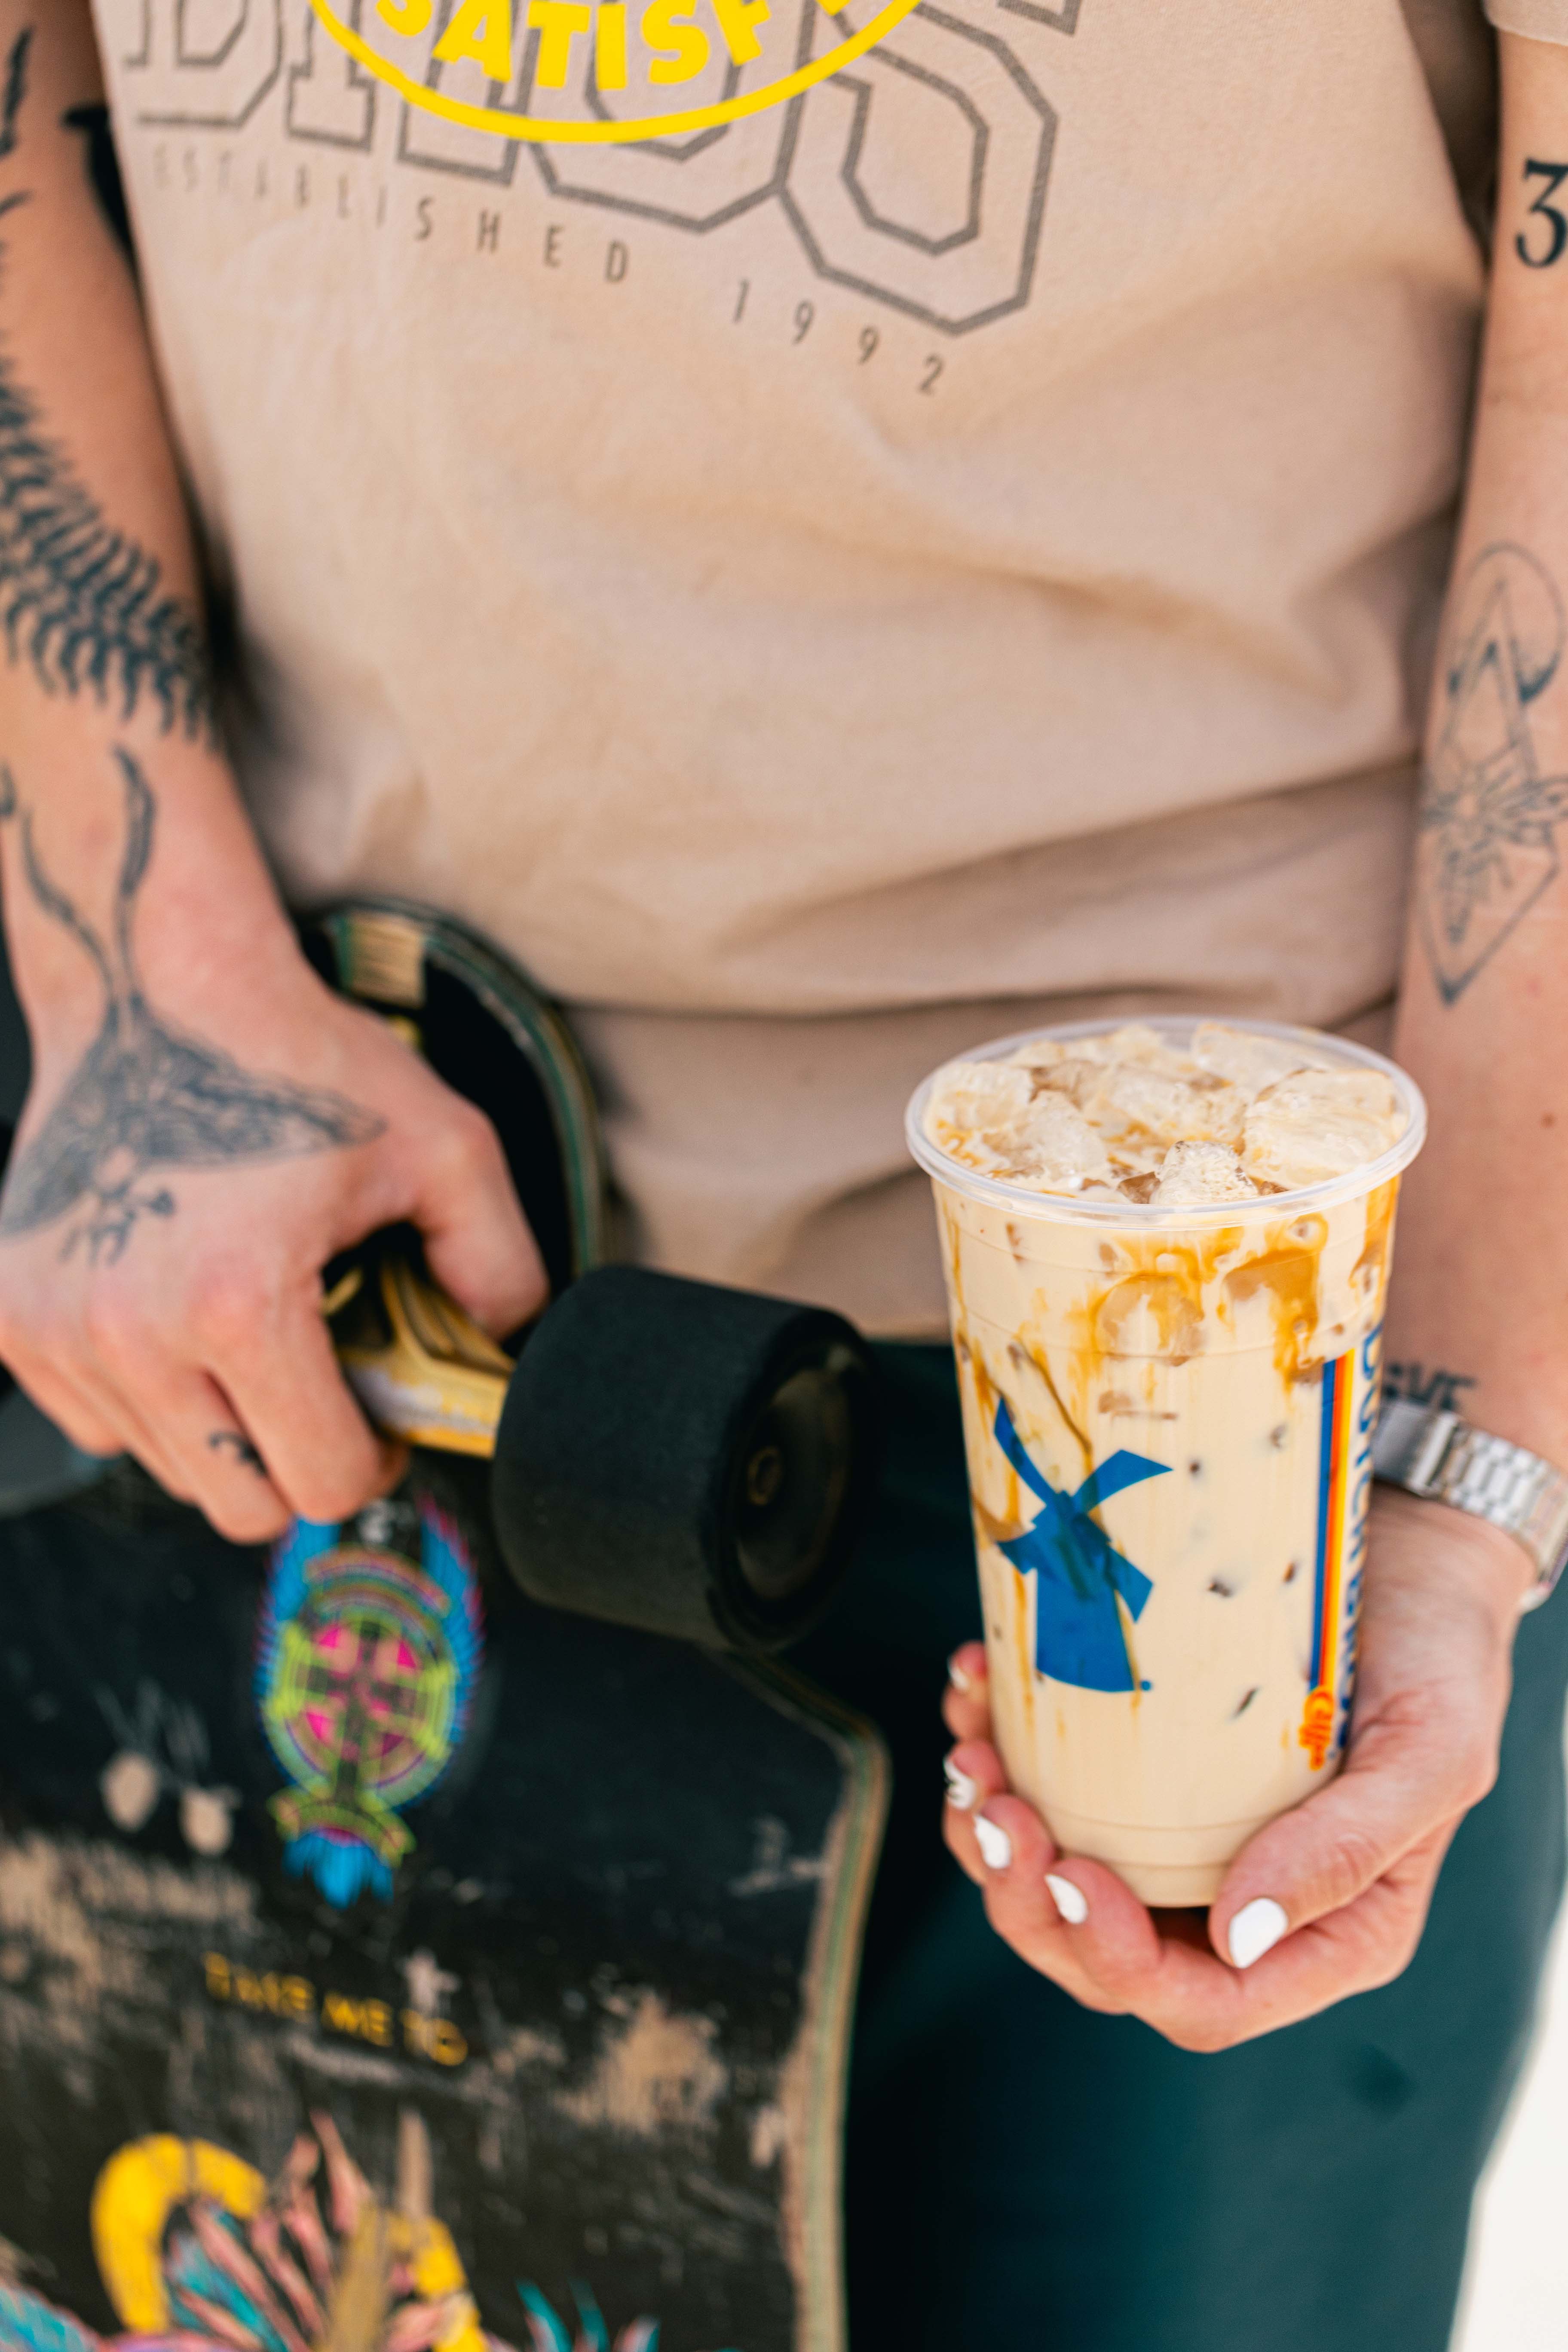 Try the Golden Eagle coffee featuring the caramel drizzle of your dreams. Dutch Bros Coffee Springfield (541)955-4700